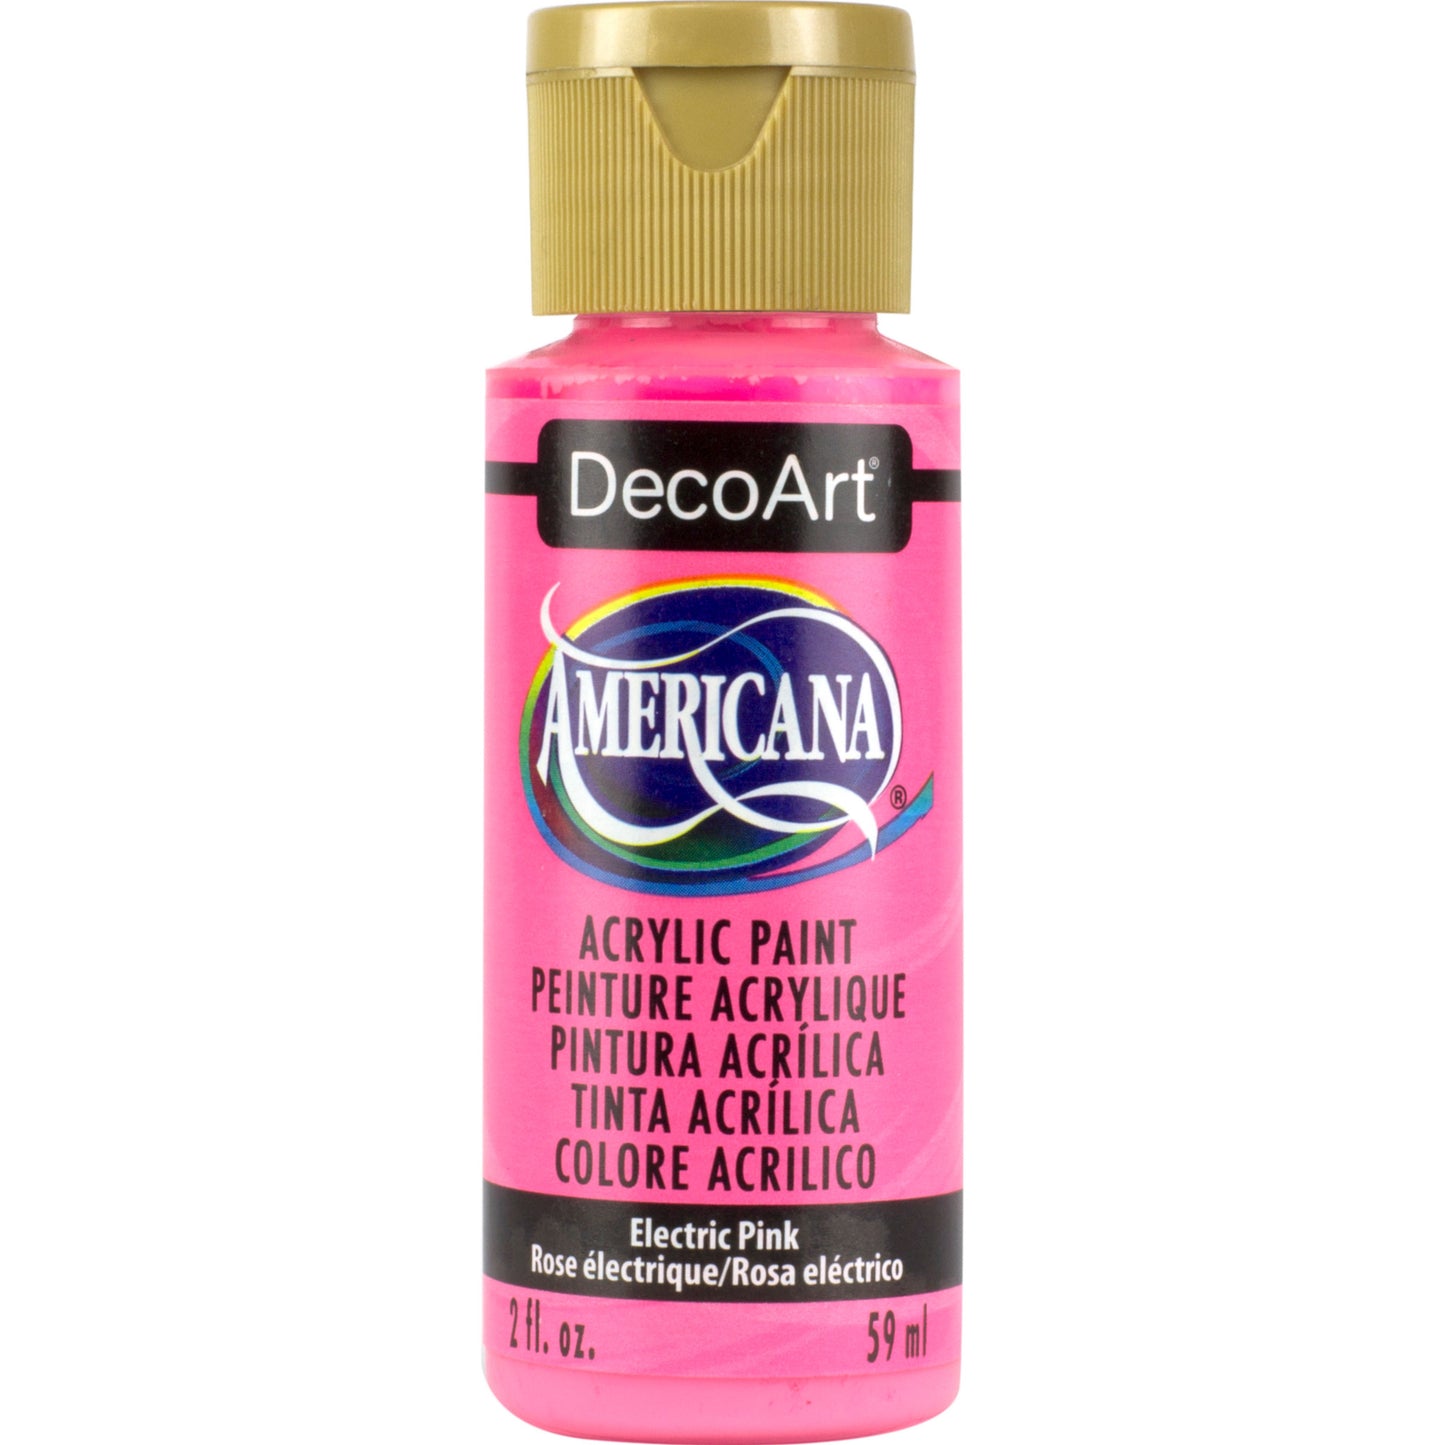 DecoArt Americana acrylic in Electric Pink - perfect for Folk Art painting 